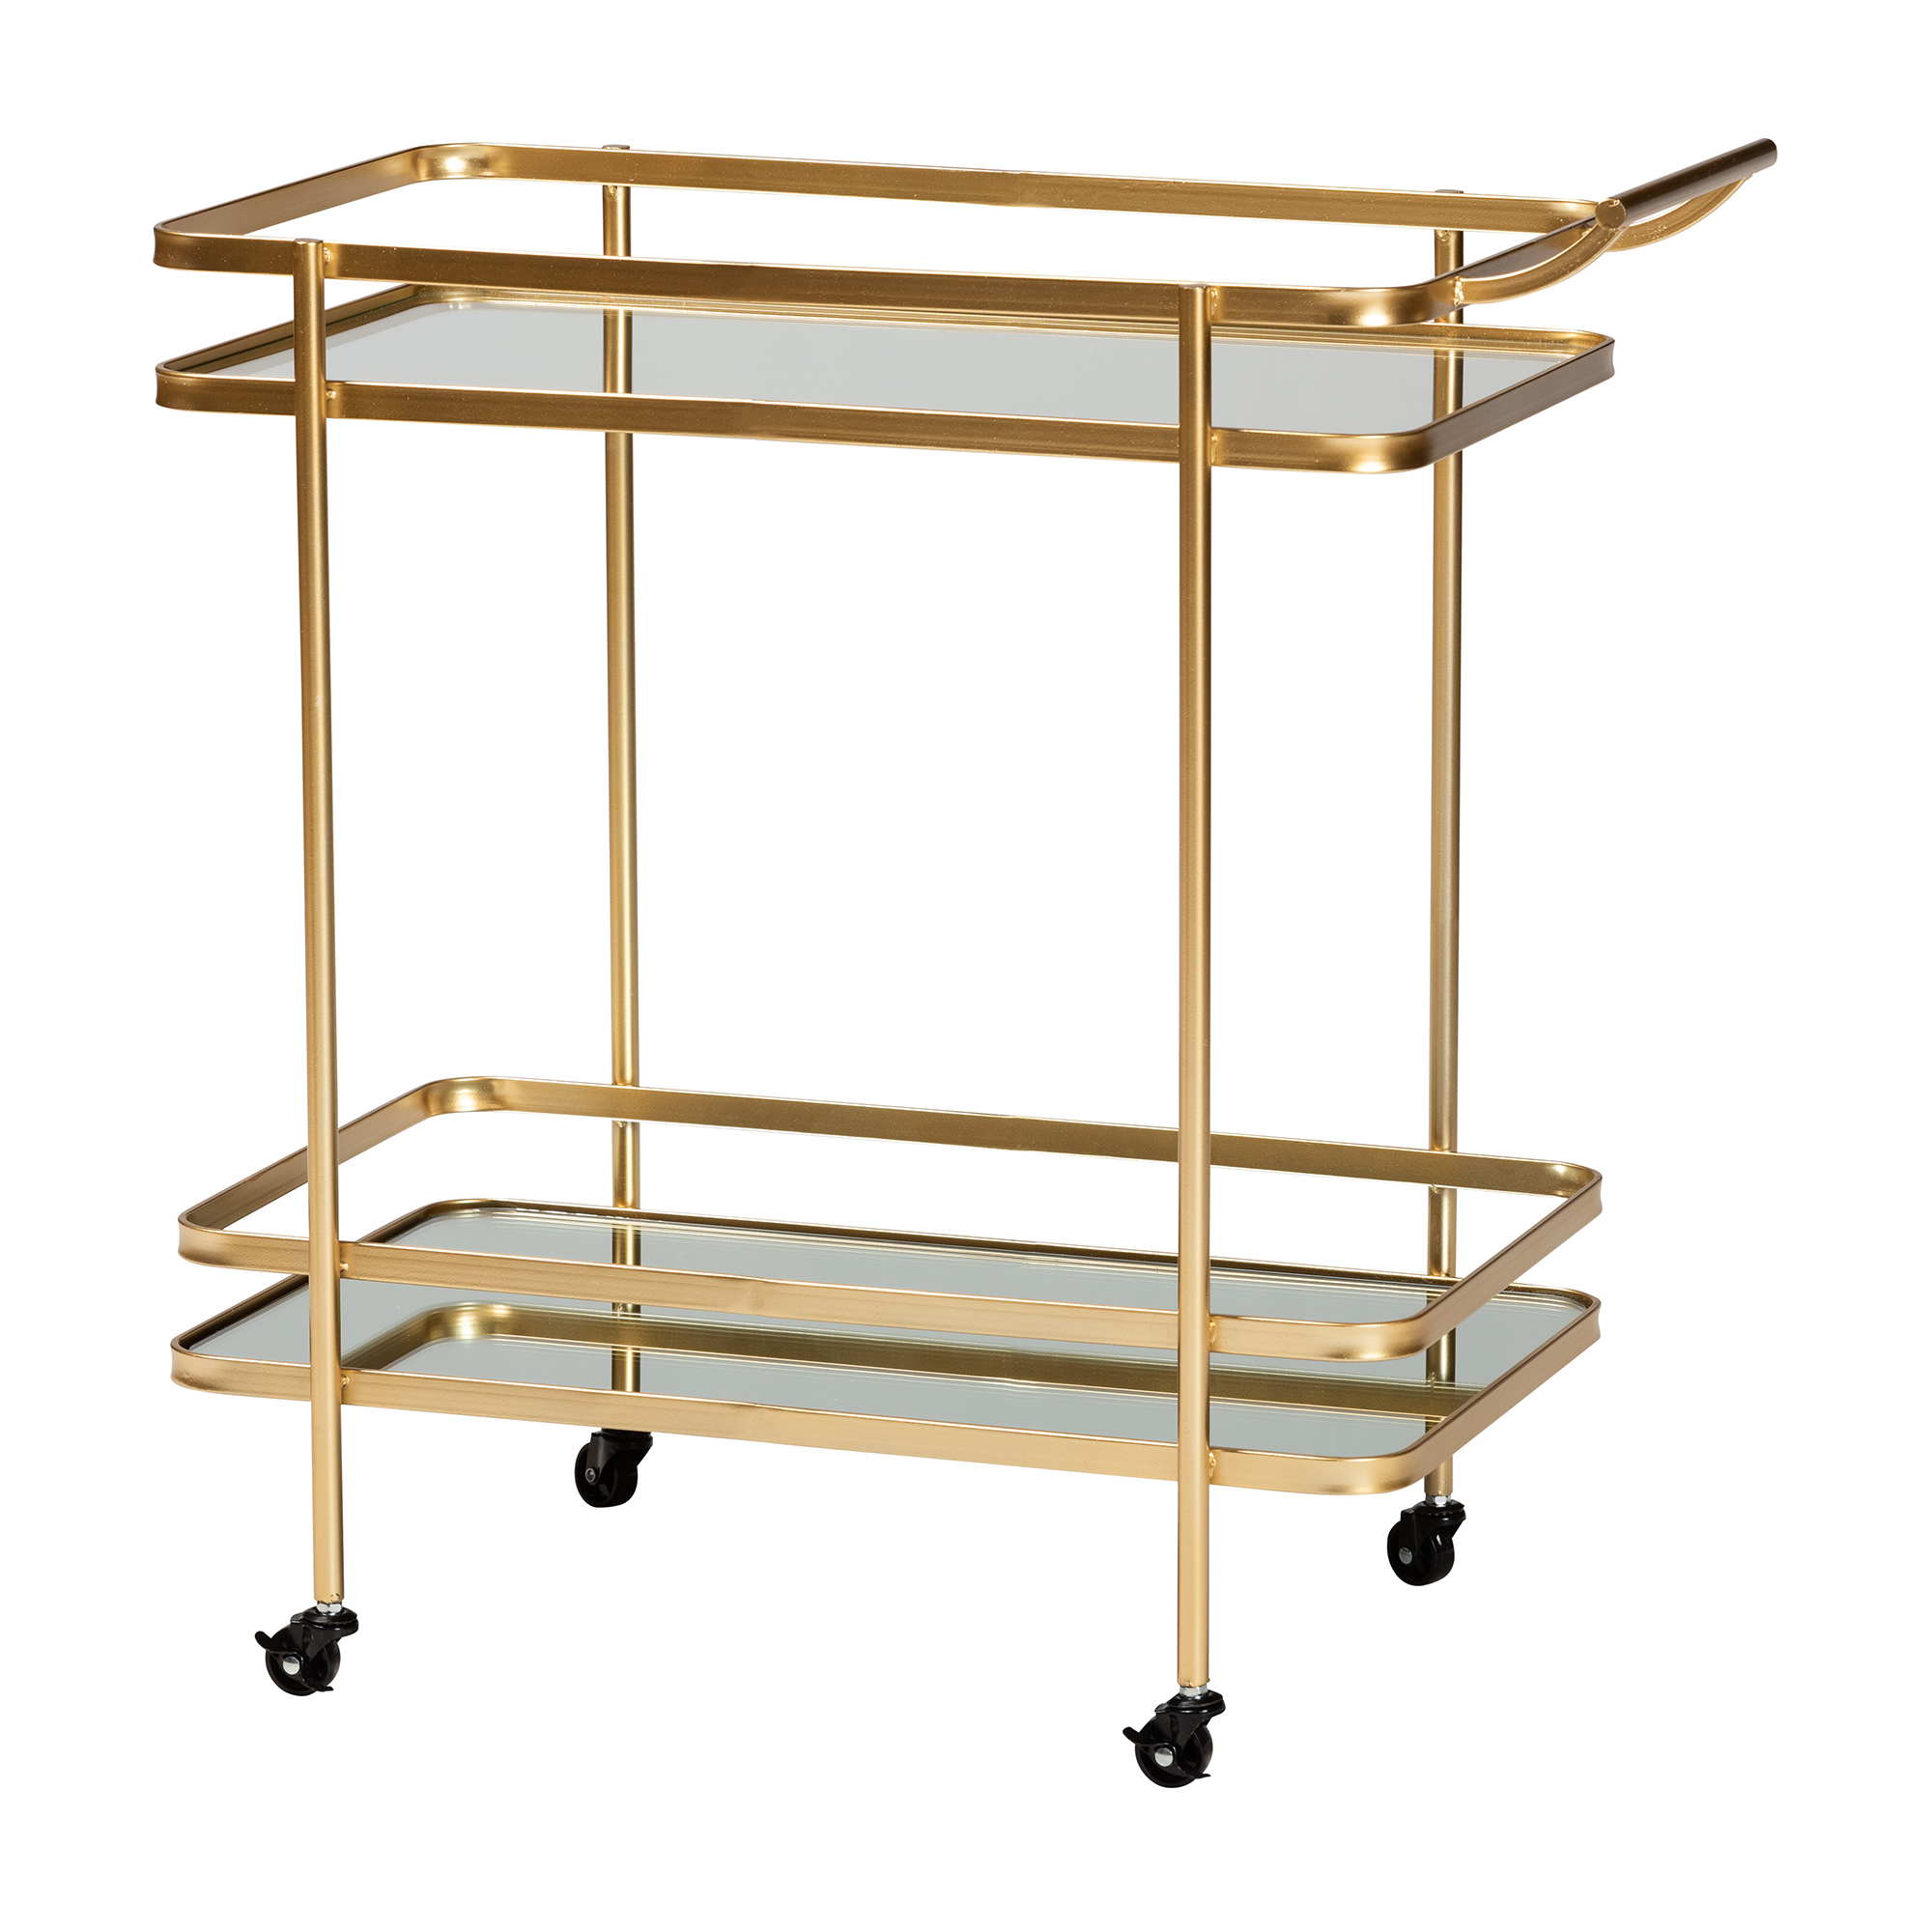 Baxton Studio Destin Modern and Contemporary Glam Brushed Gold Finished Metal and Mirrored Glass 2-Tier Mobile Wine Bar Cart Affordable modern furniture in Chicago, classic dining room furniture, modern kitchen cart, cheap kitchen cart